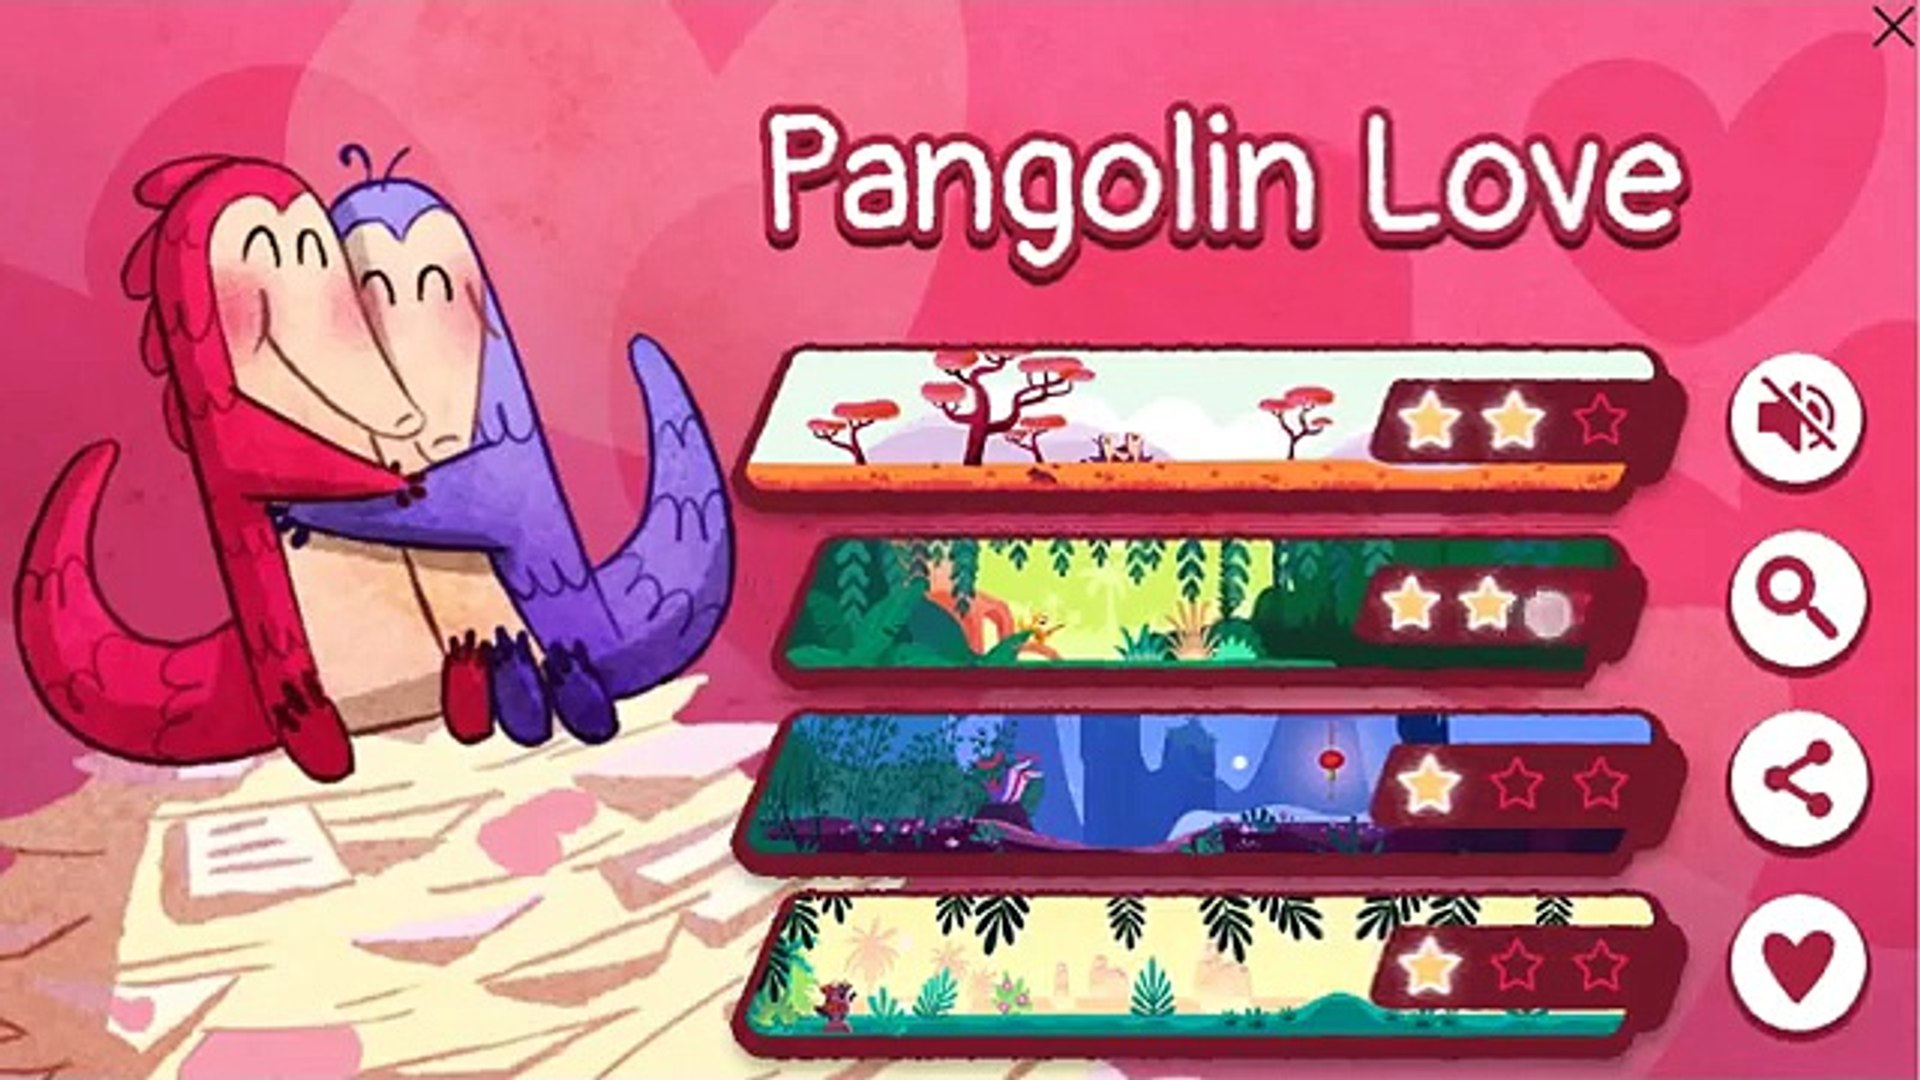 Google Doodle Valentines day 2017: Pangolin love (Valentines mini game of  Google) - Dailymotion Video